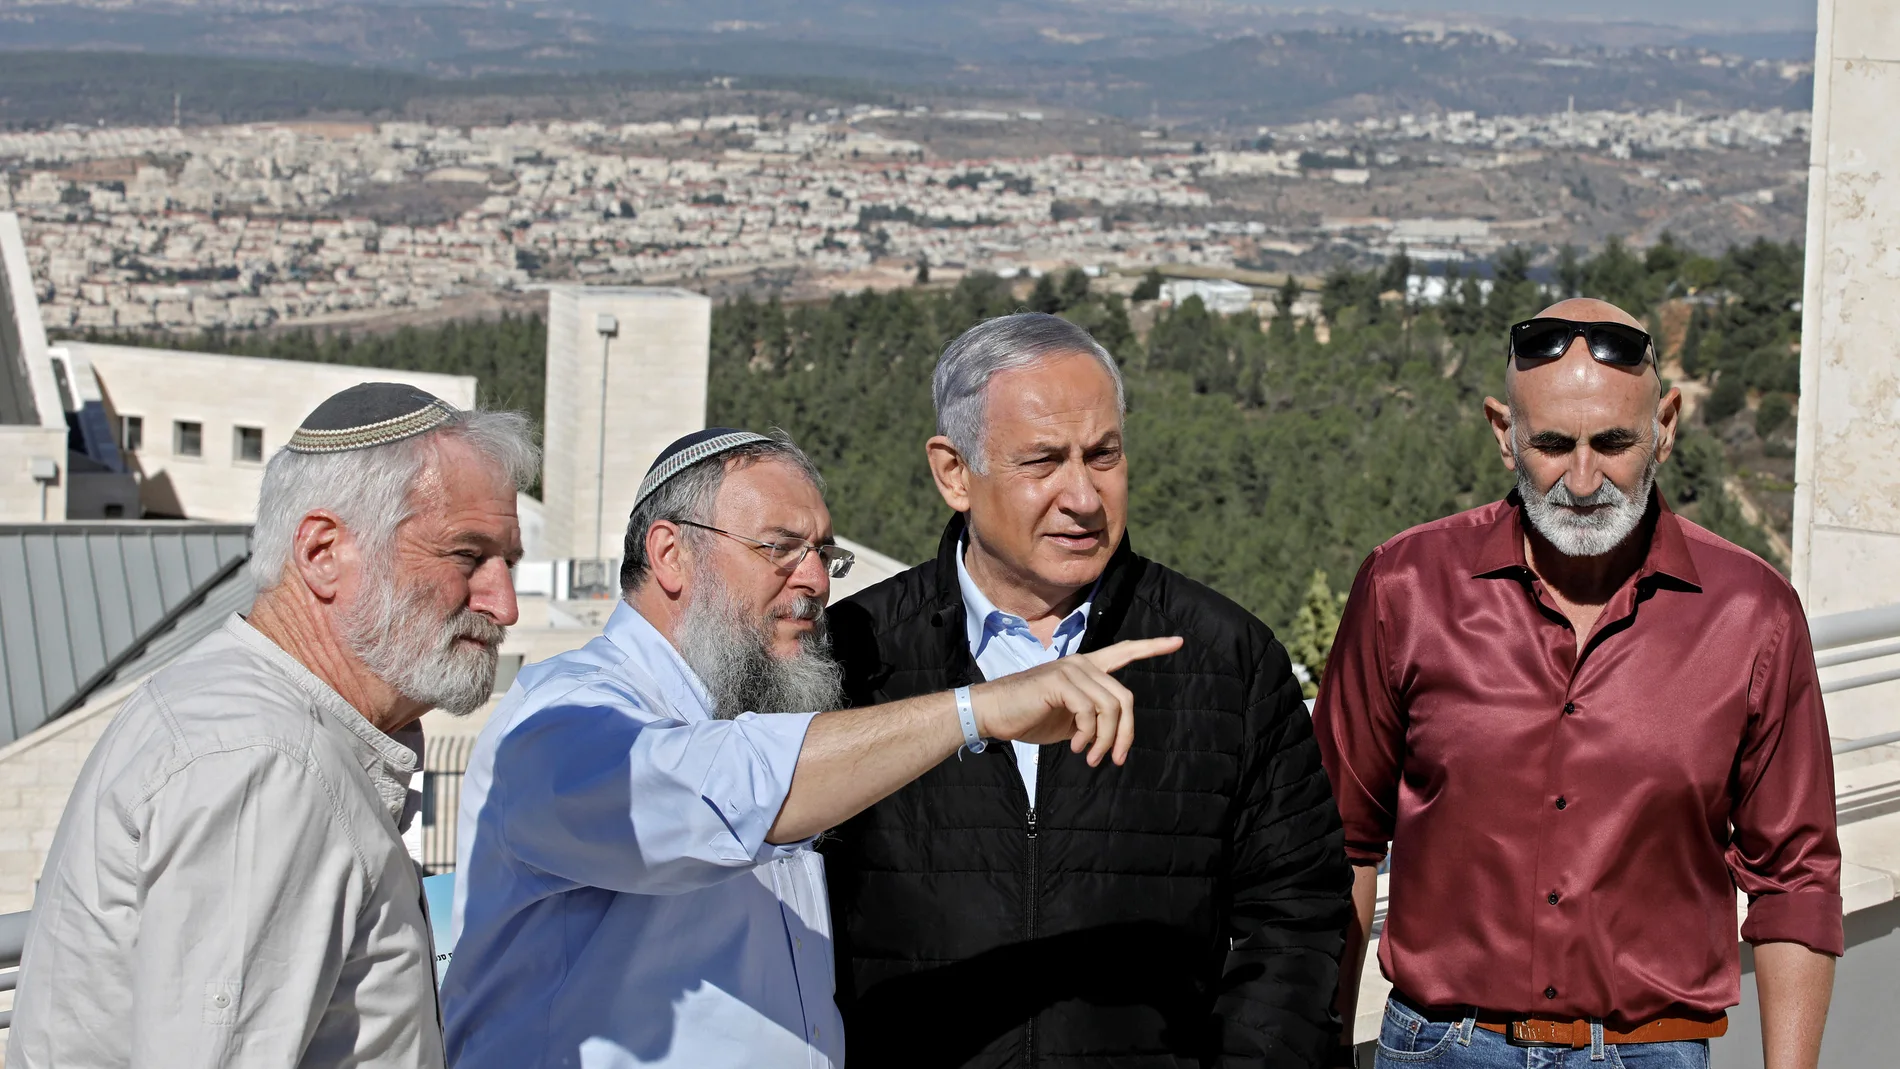 Israeli Prime Minister Benjamin Netanyahu meets heads of regional councils in Jewish settlements at the Alon Shvut settlement, in the Gush Etzion block in the occupied West Bank